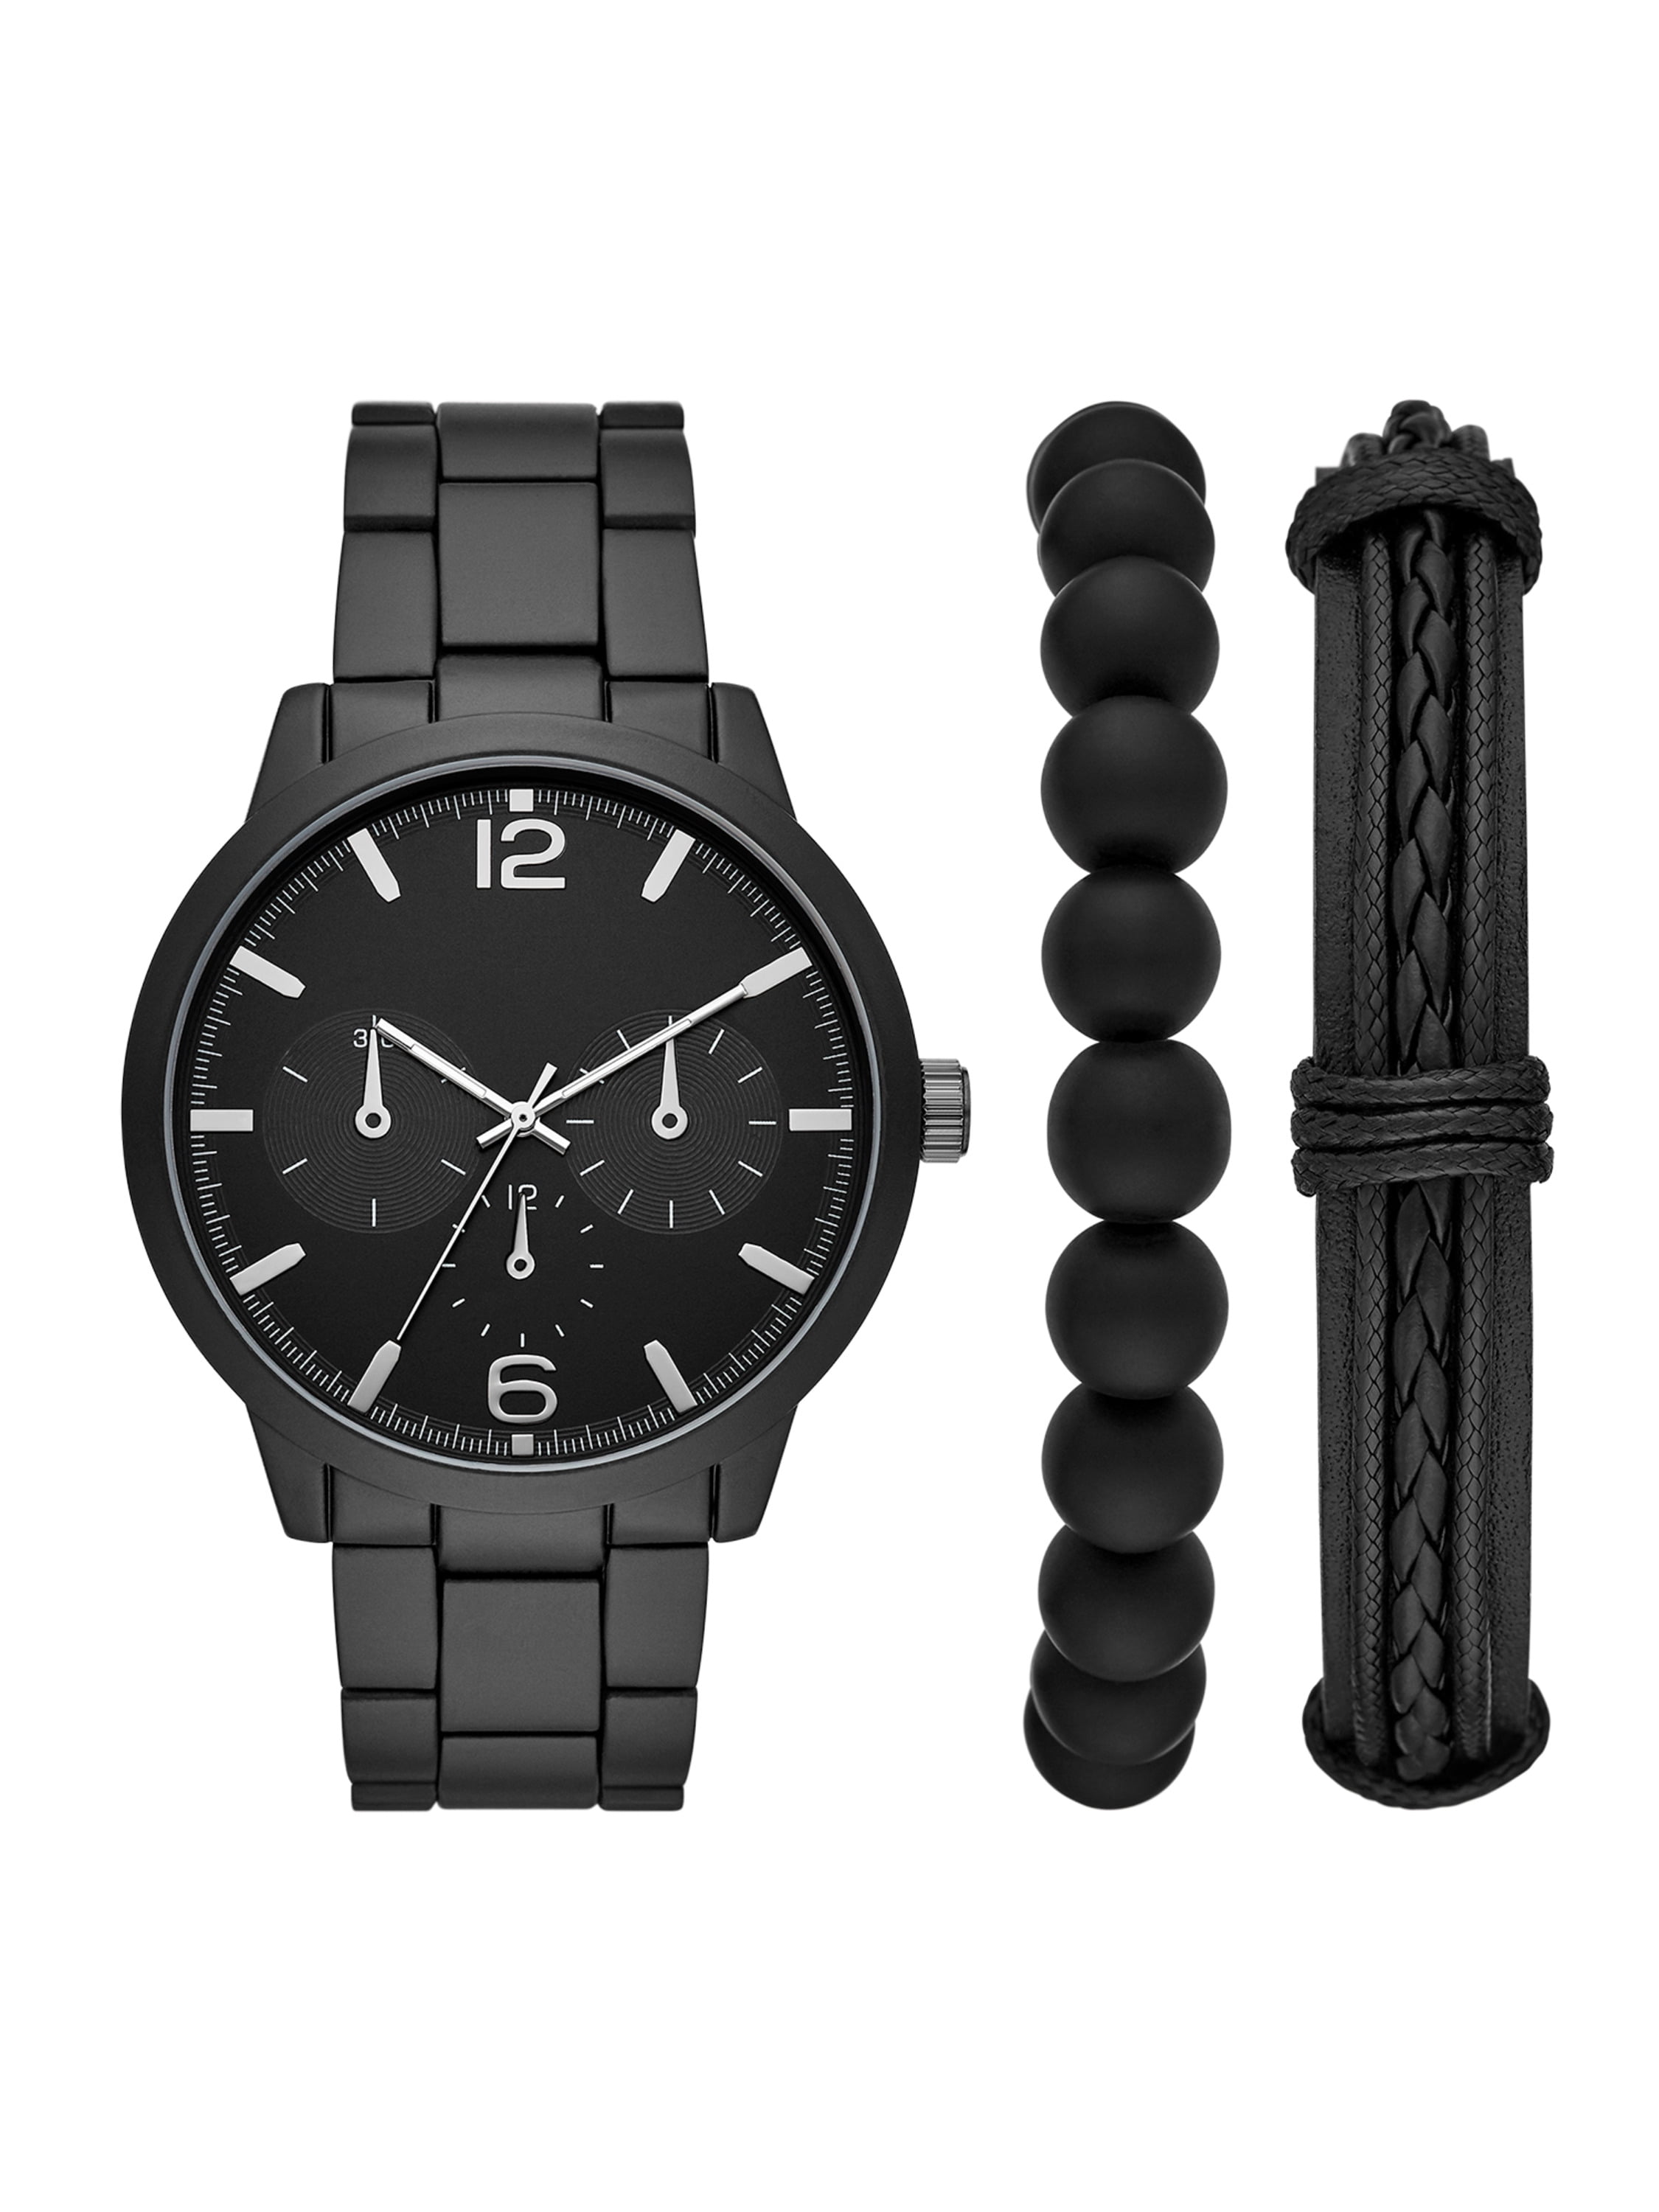 Men's Black Round Analog Watch with Two Bracelets and Travel Bag